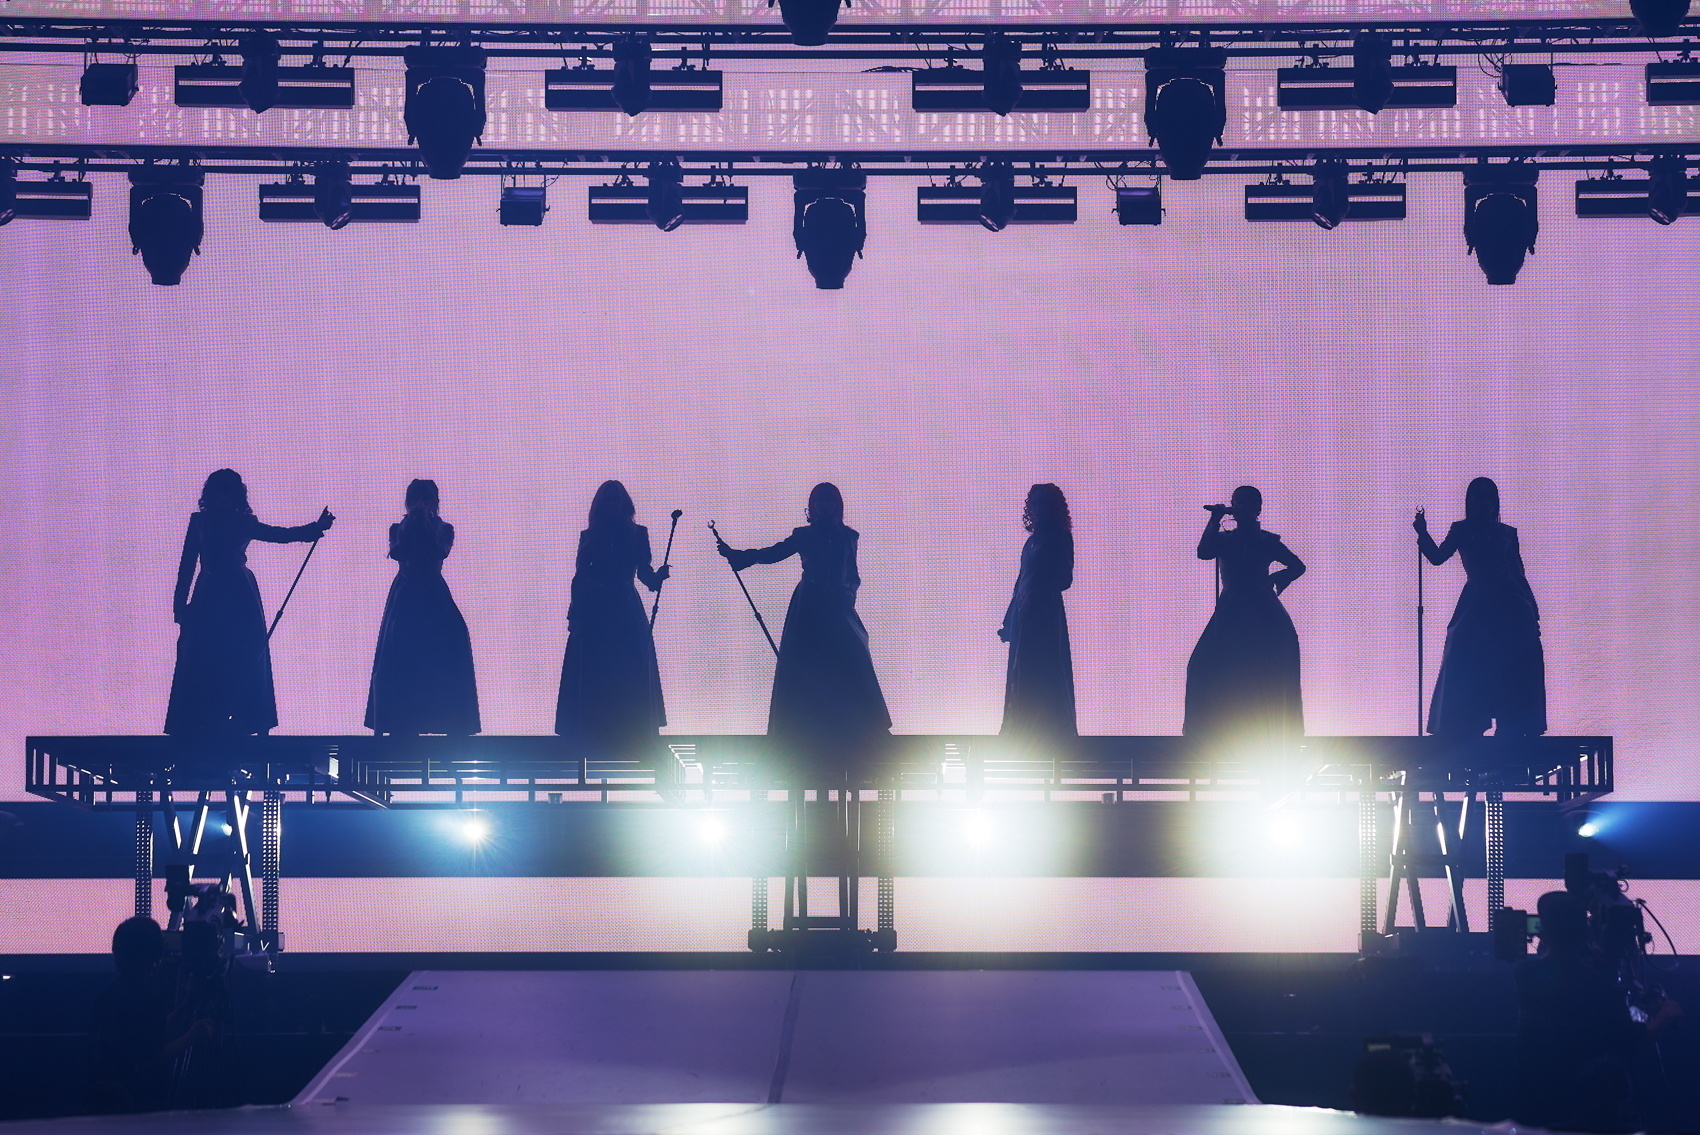 Seven women stand on an elevated stage in silhouette, each holding a microphone. The background is a large, brightly lit screen